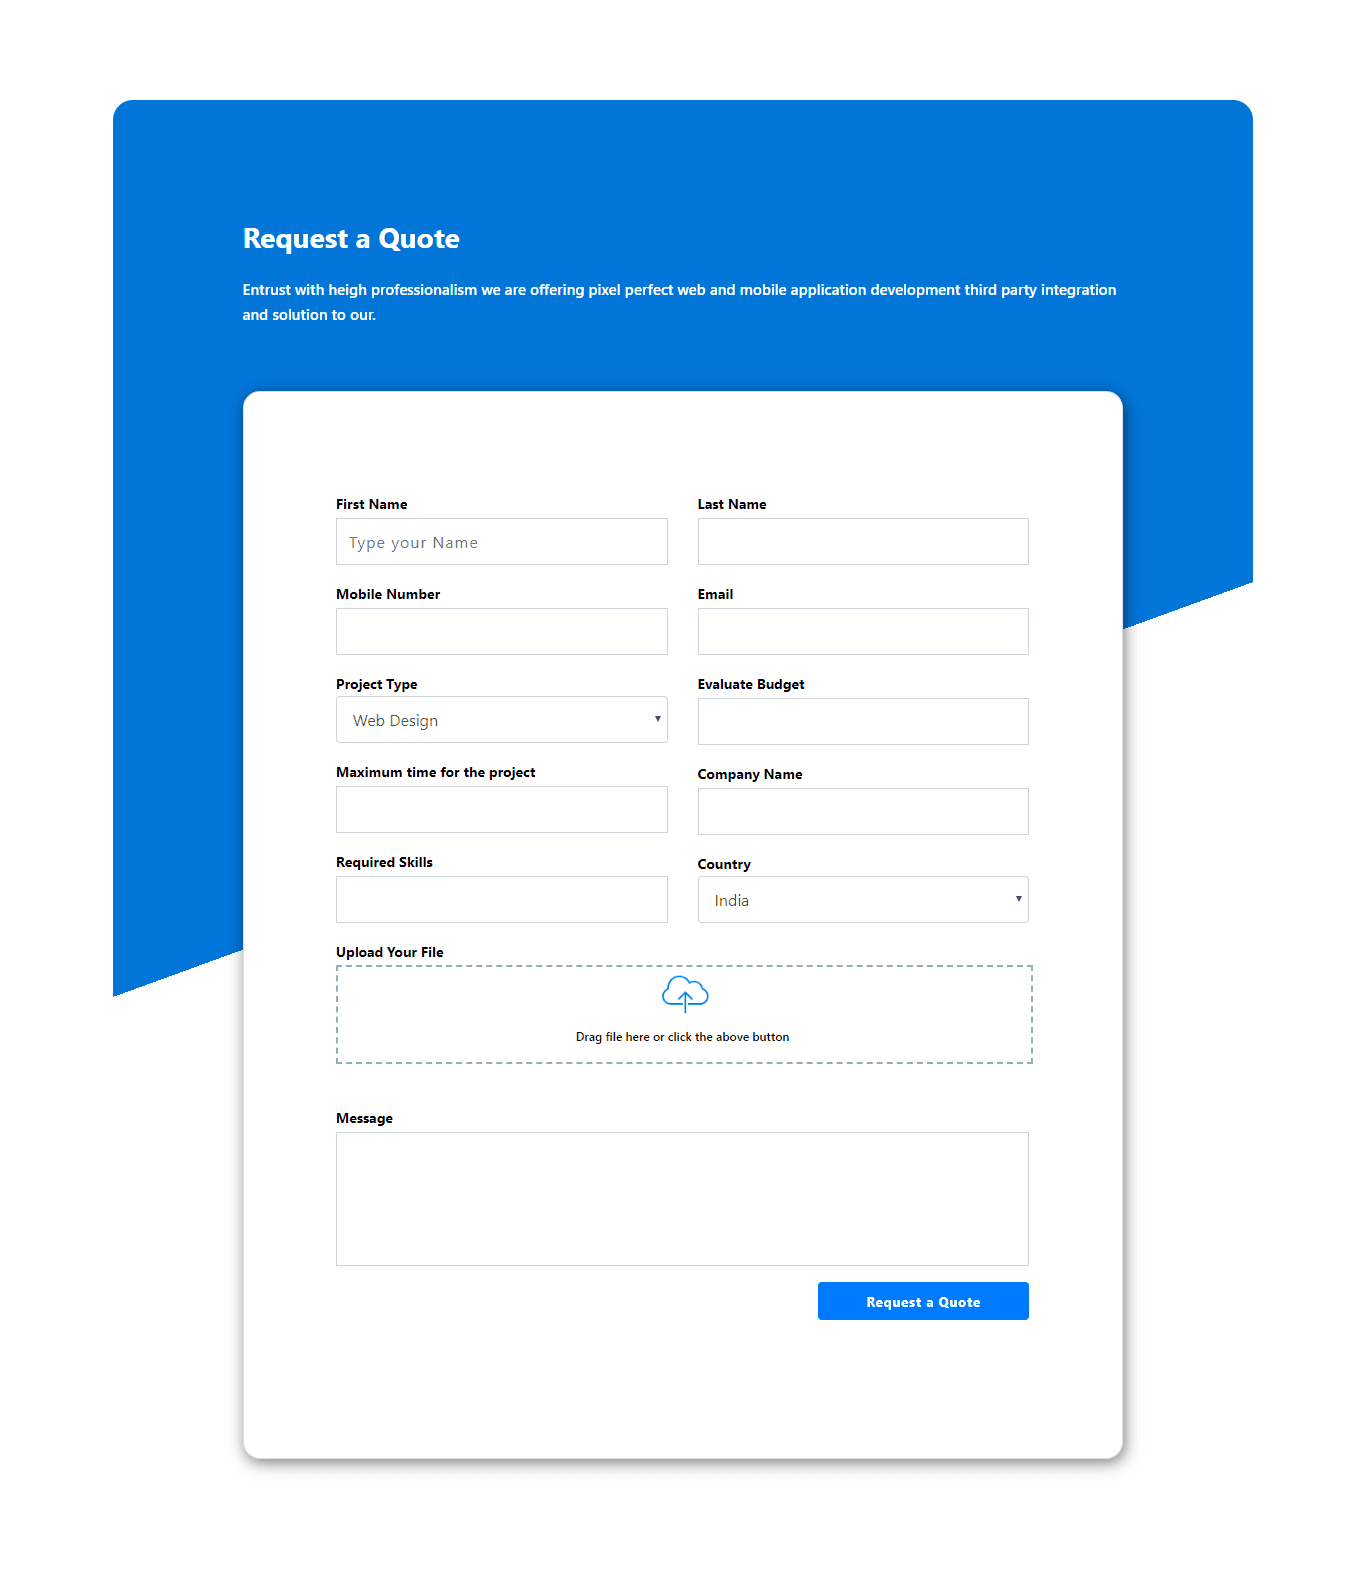 request a quote form with upload file